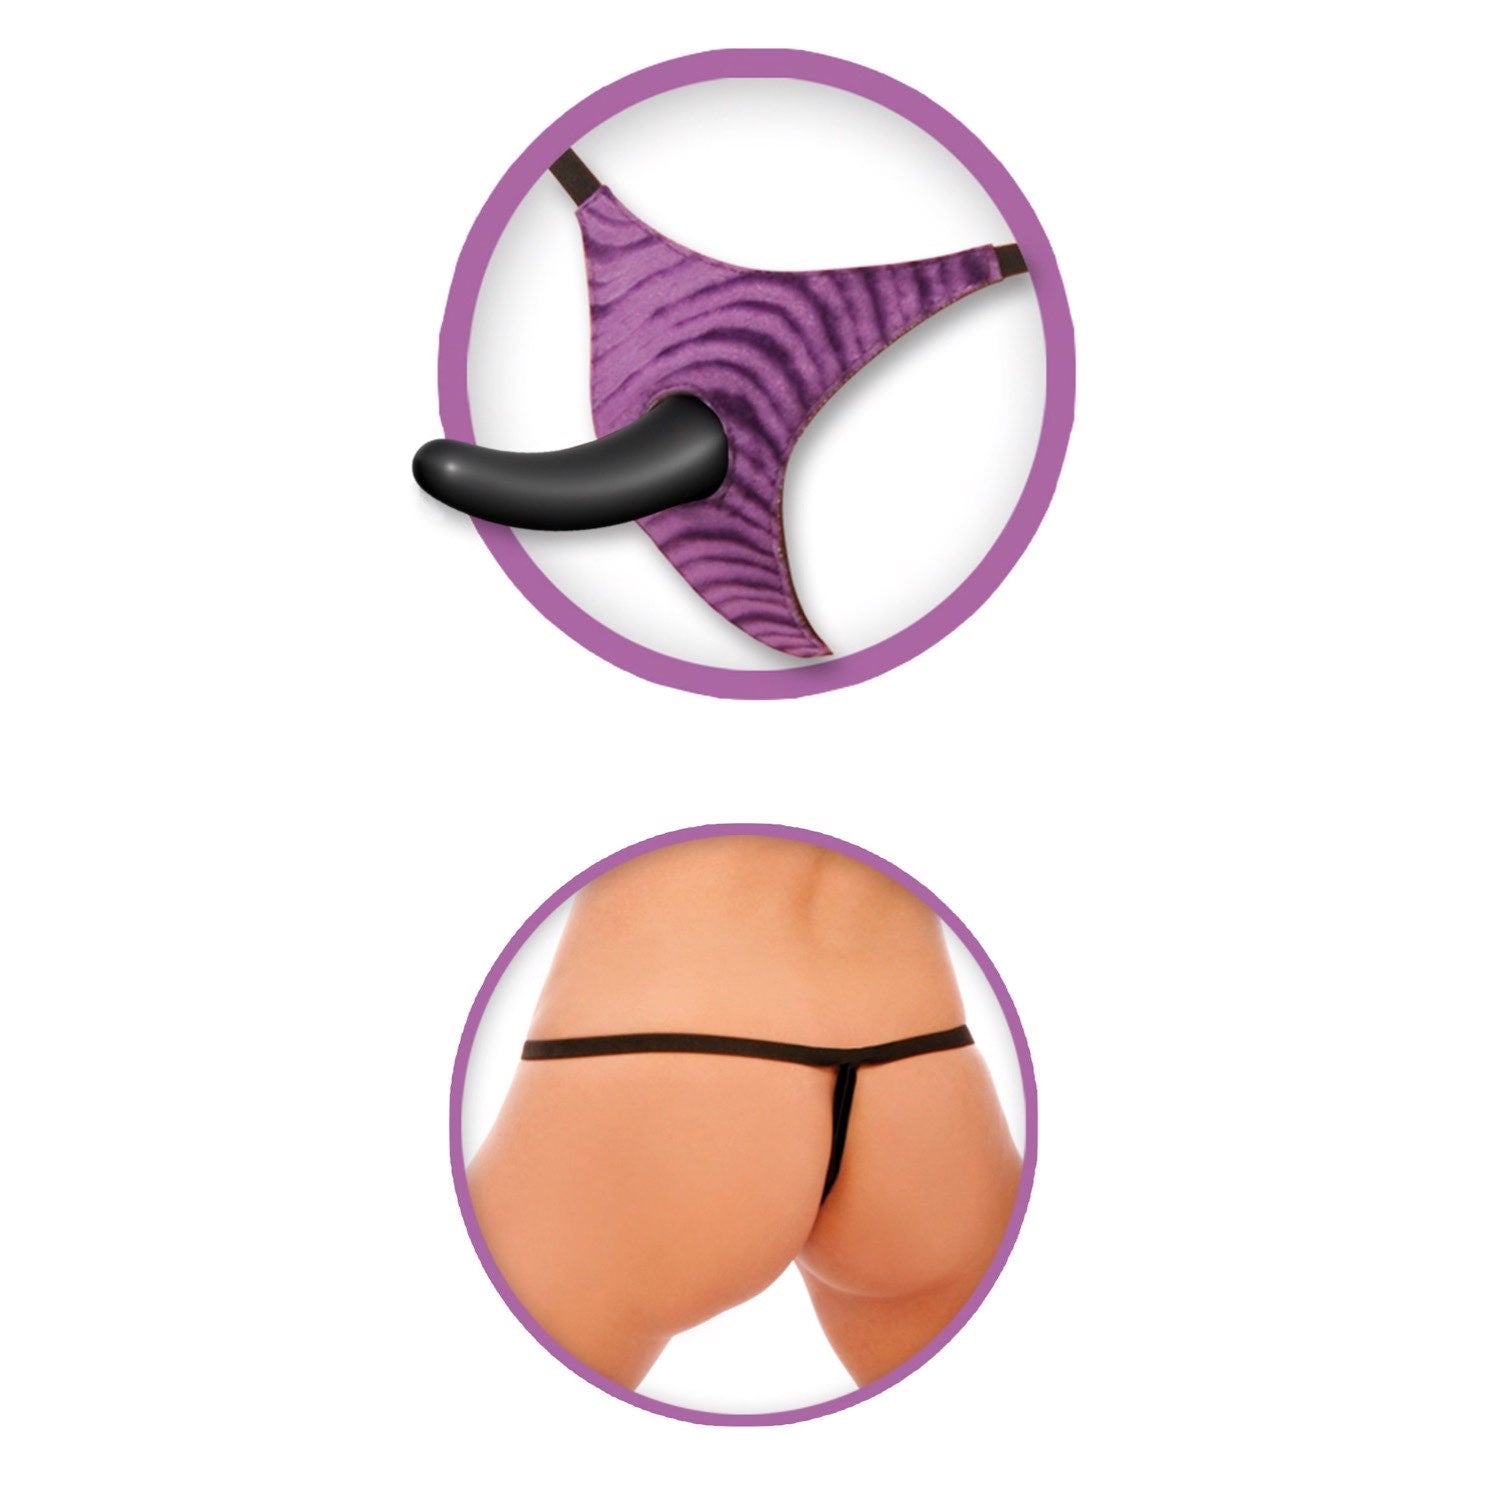 Fetish Fantasy Series Vibrating Strap-On For Him - Black/Purple 13 cm (5&quot;) Vibrating Strap-On by Pipedream